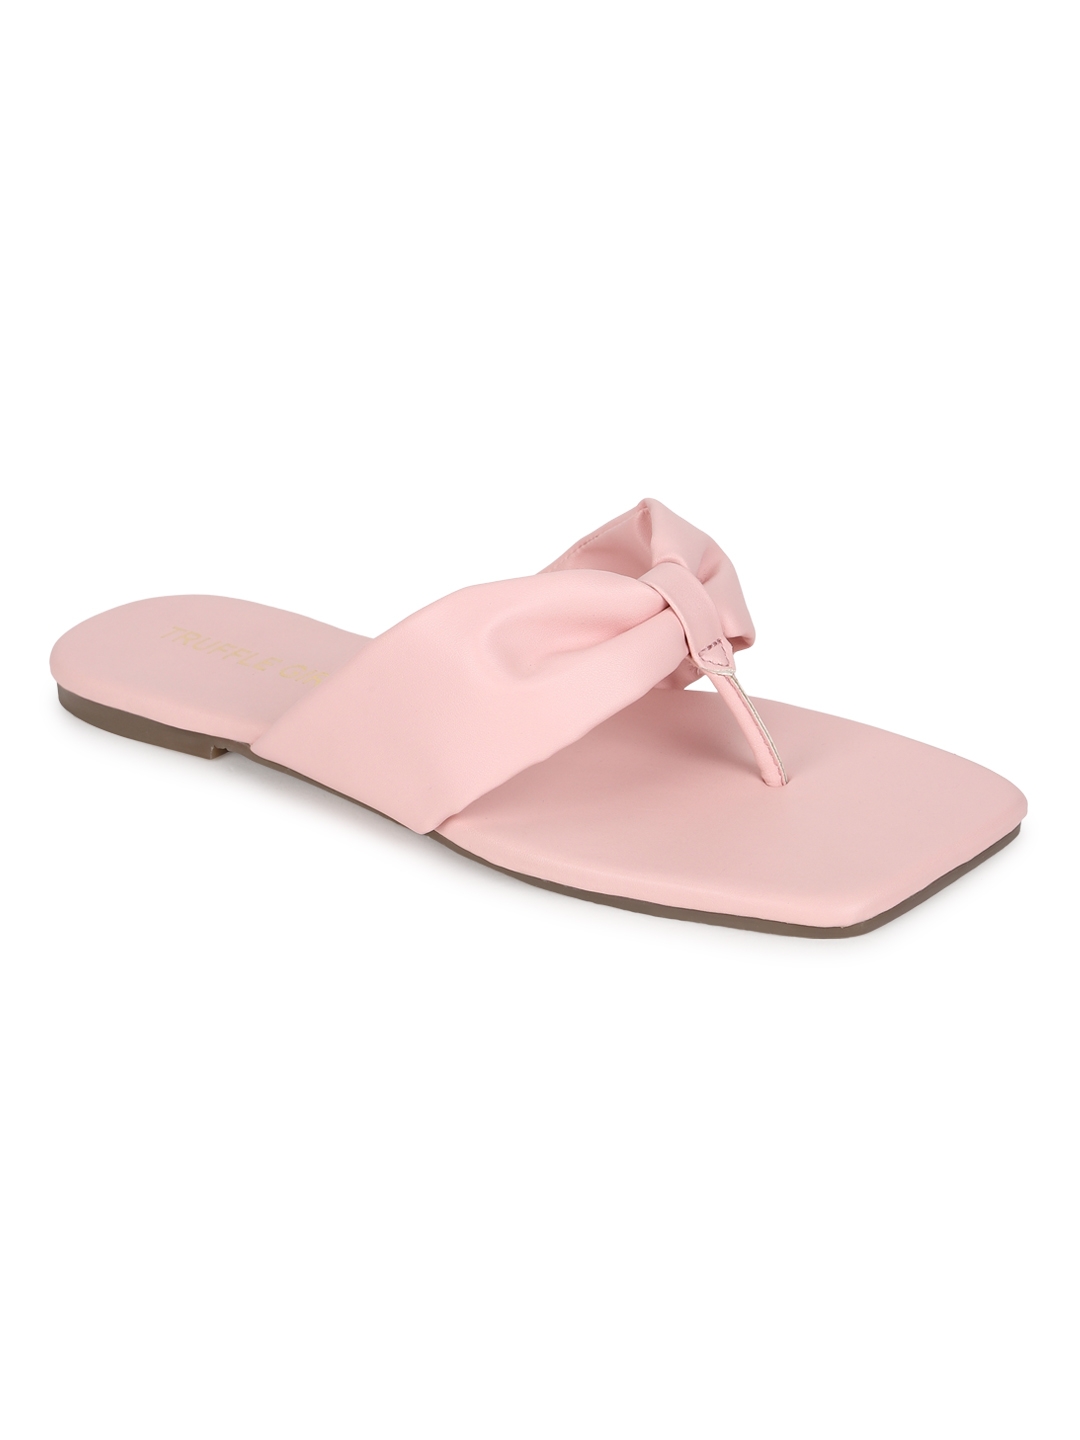 Baby Pink PU Flip Flop Slippers